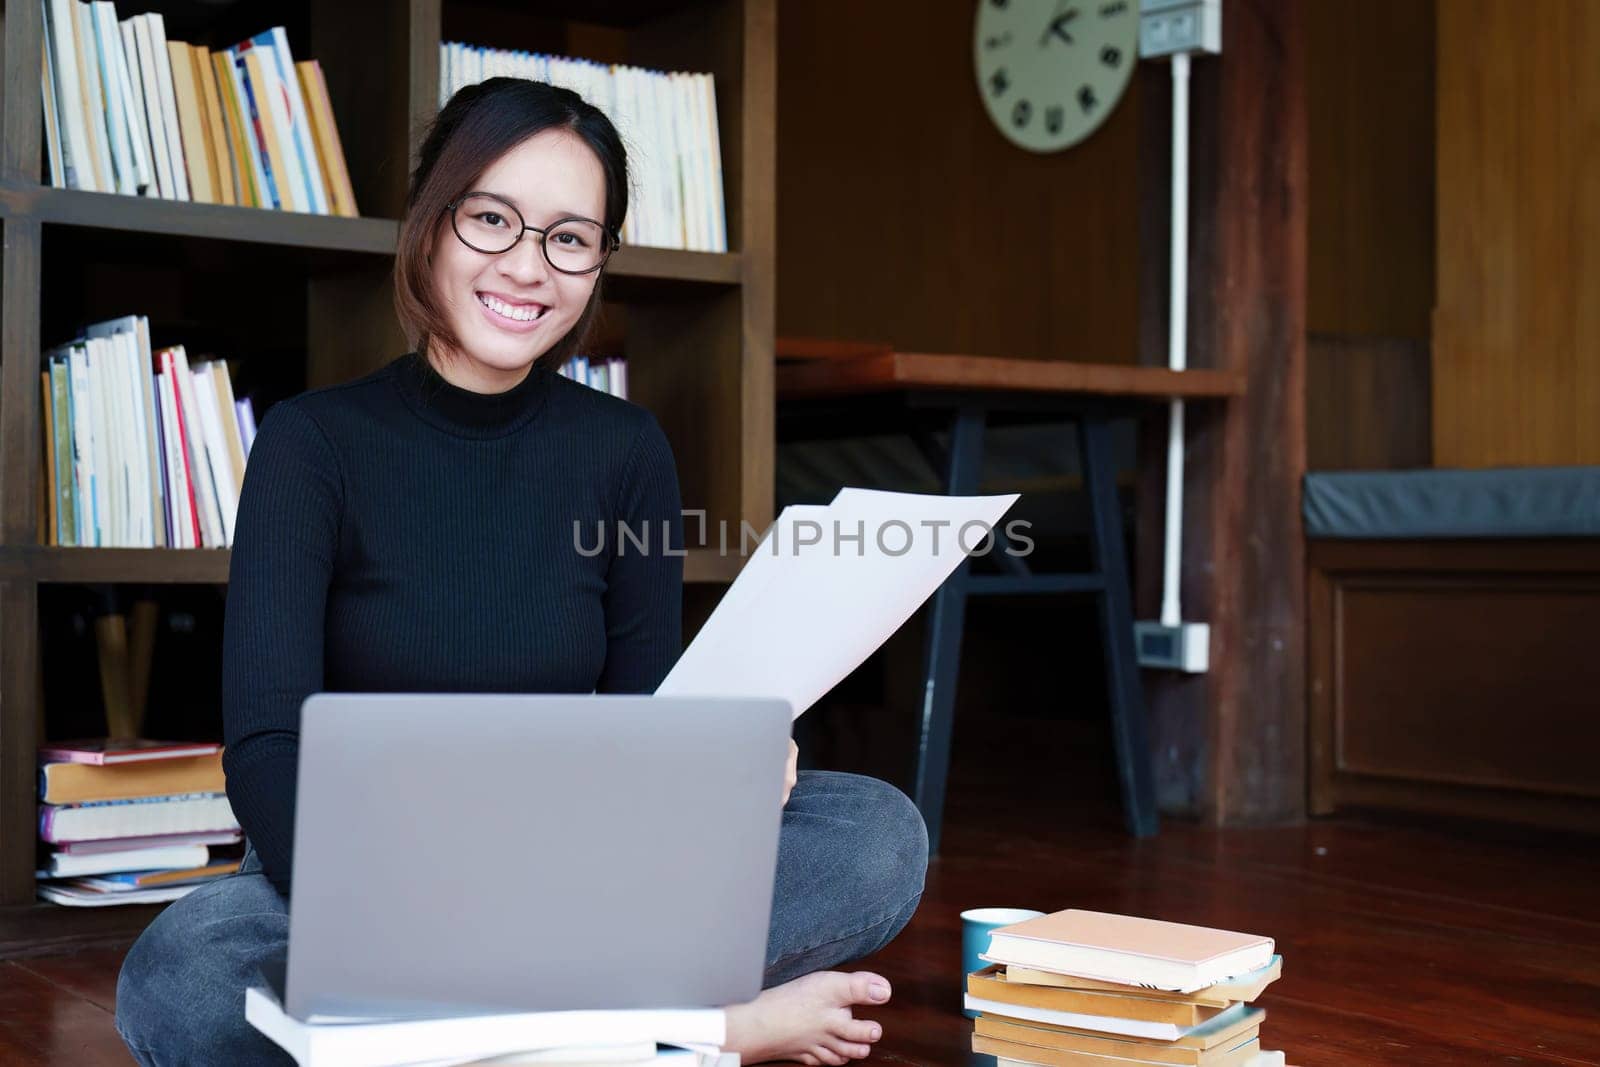 A portrait of a young Asian female student with a smiling face using a computer and holding study materials in the library.